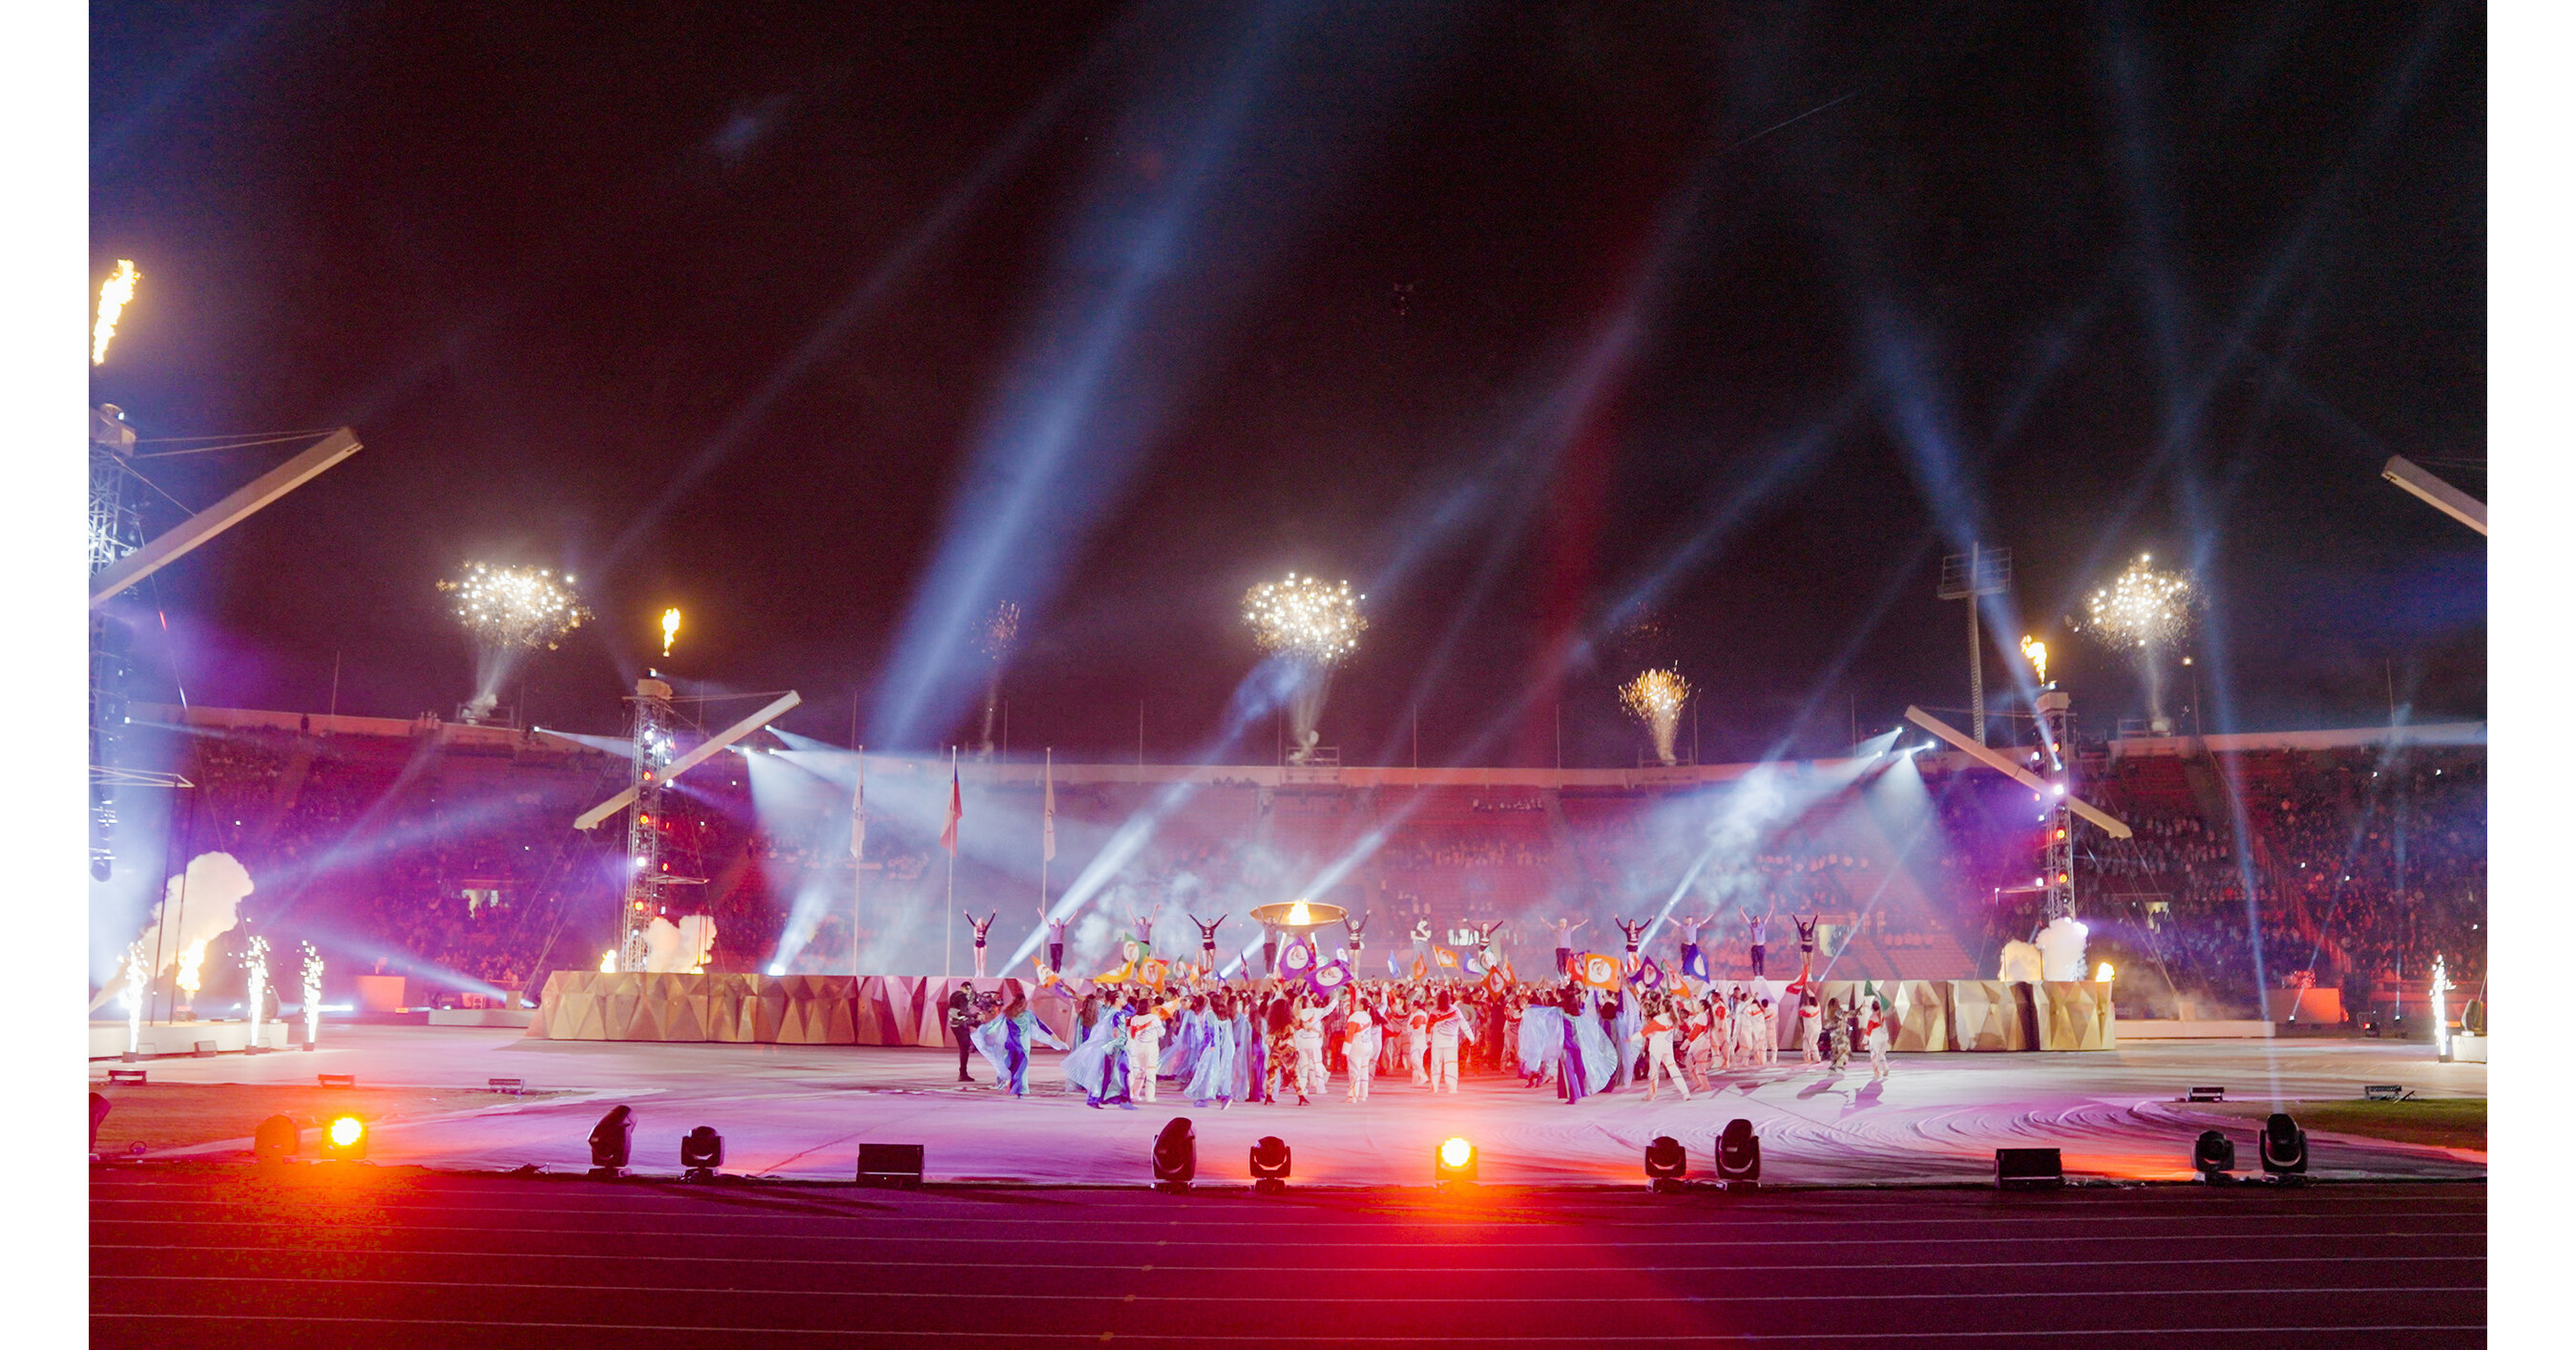 CHILE SHINES WITH A SPECTACULAR OPENING CEREMONY OF THE PAN AMERICAN